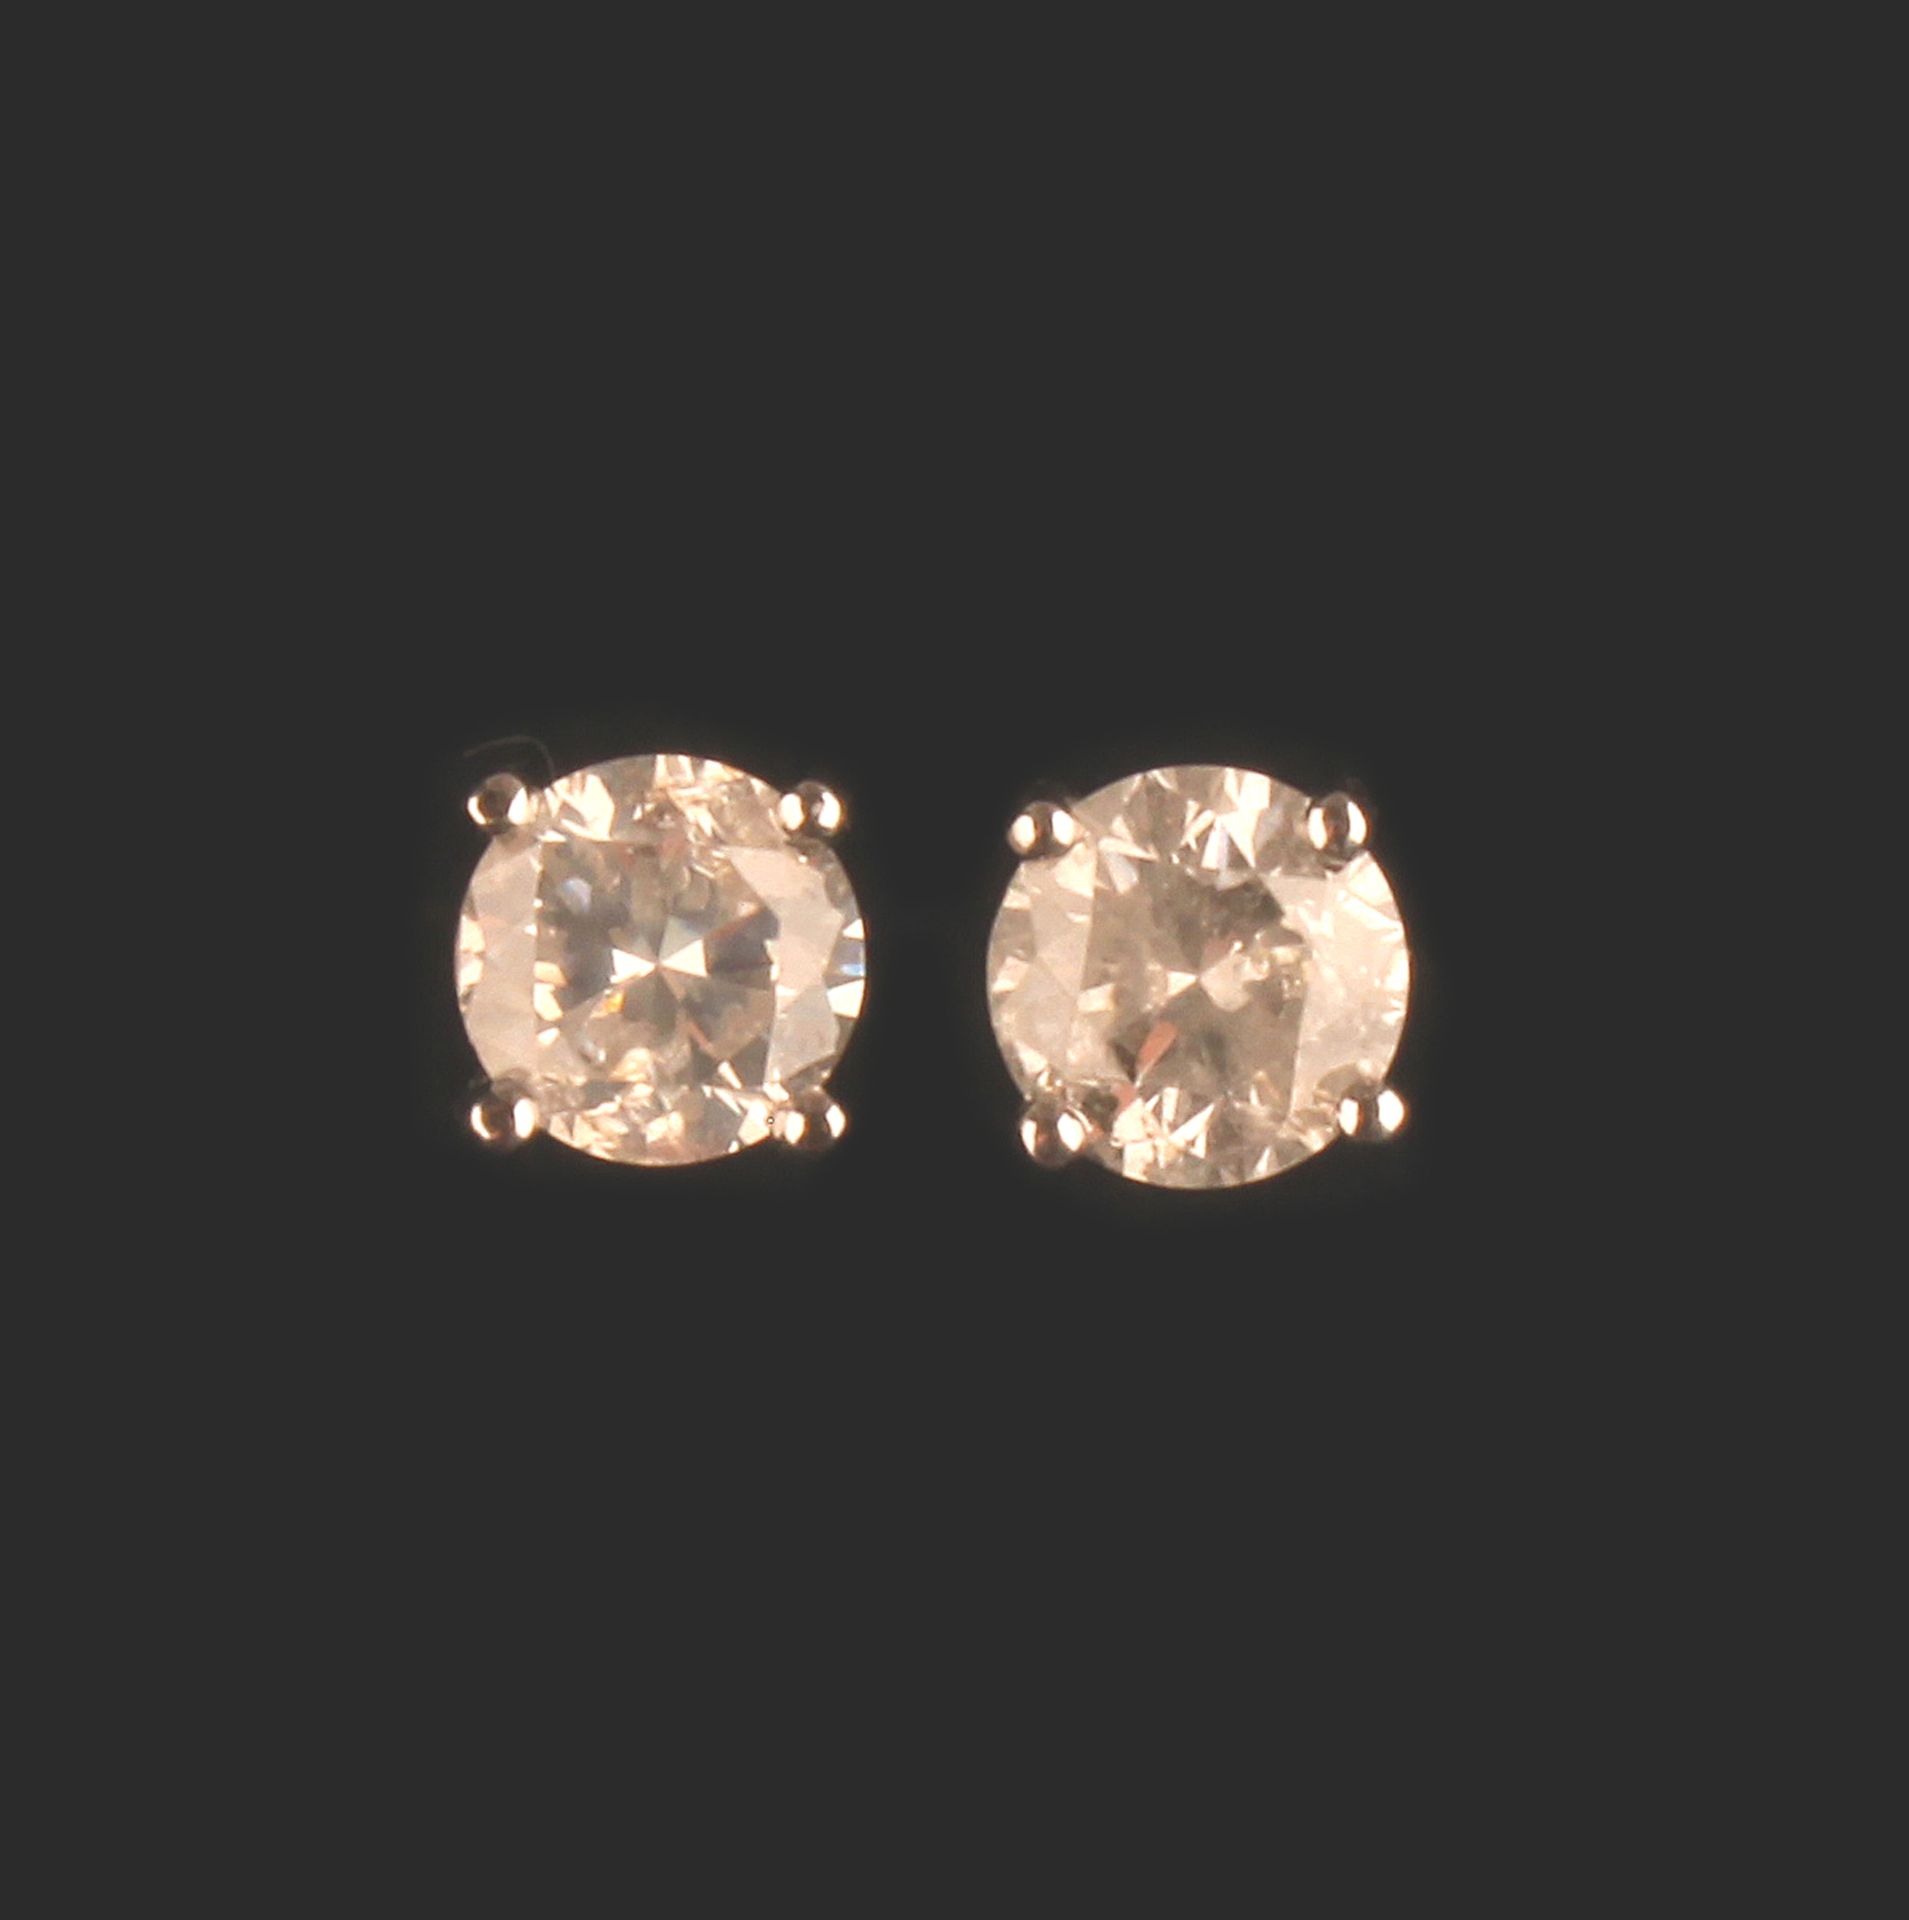 2.10cts DIAMOND EARRINGS SET IN 18ct WHITE GOLD - Image 5 of 7